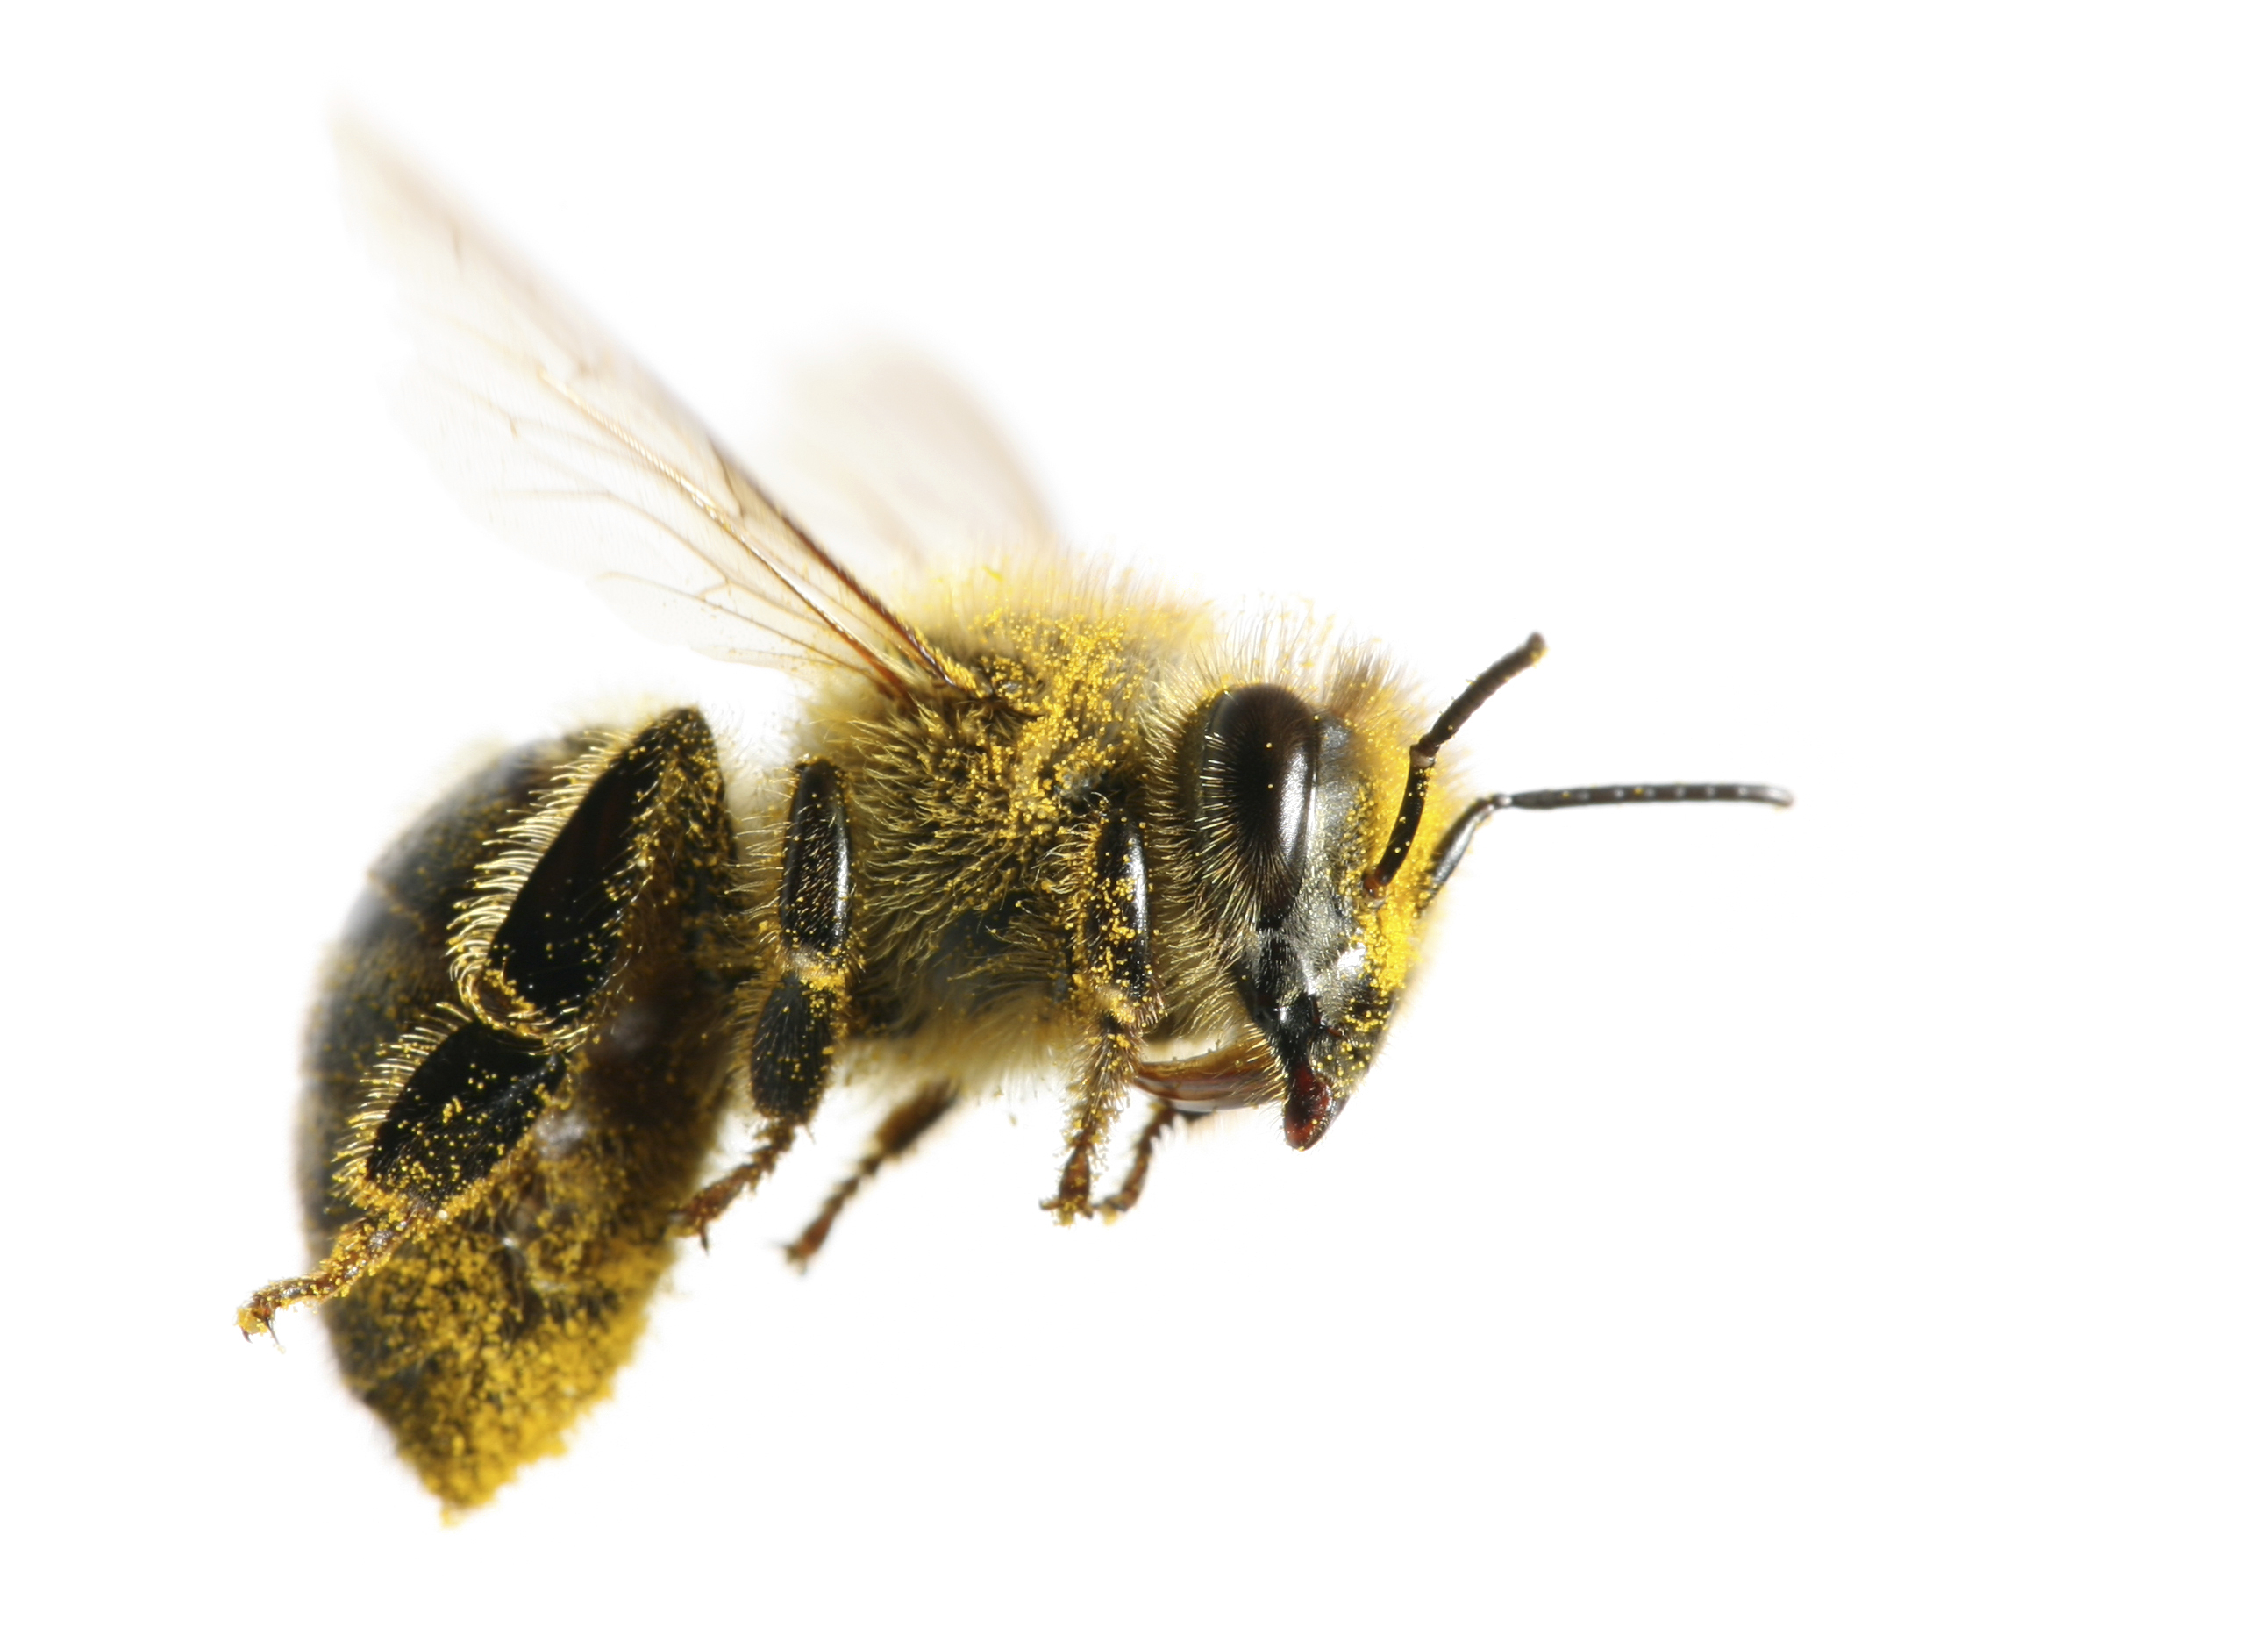 File:Honeybee by togopic.png